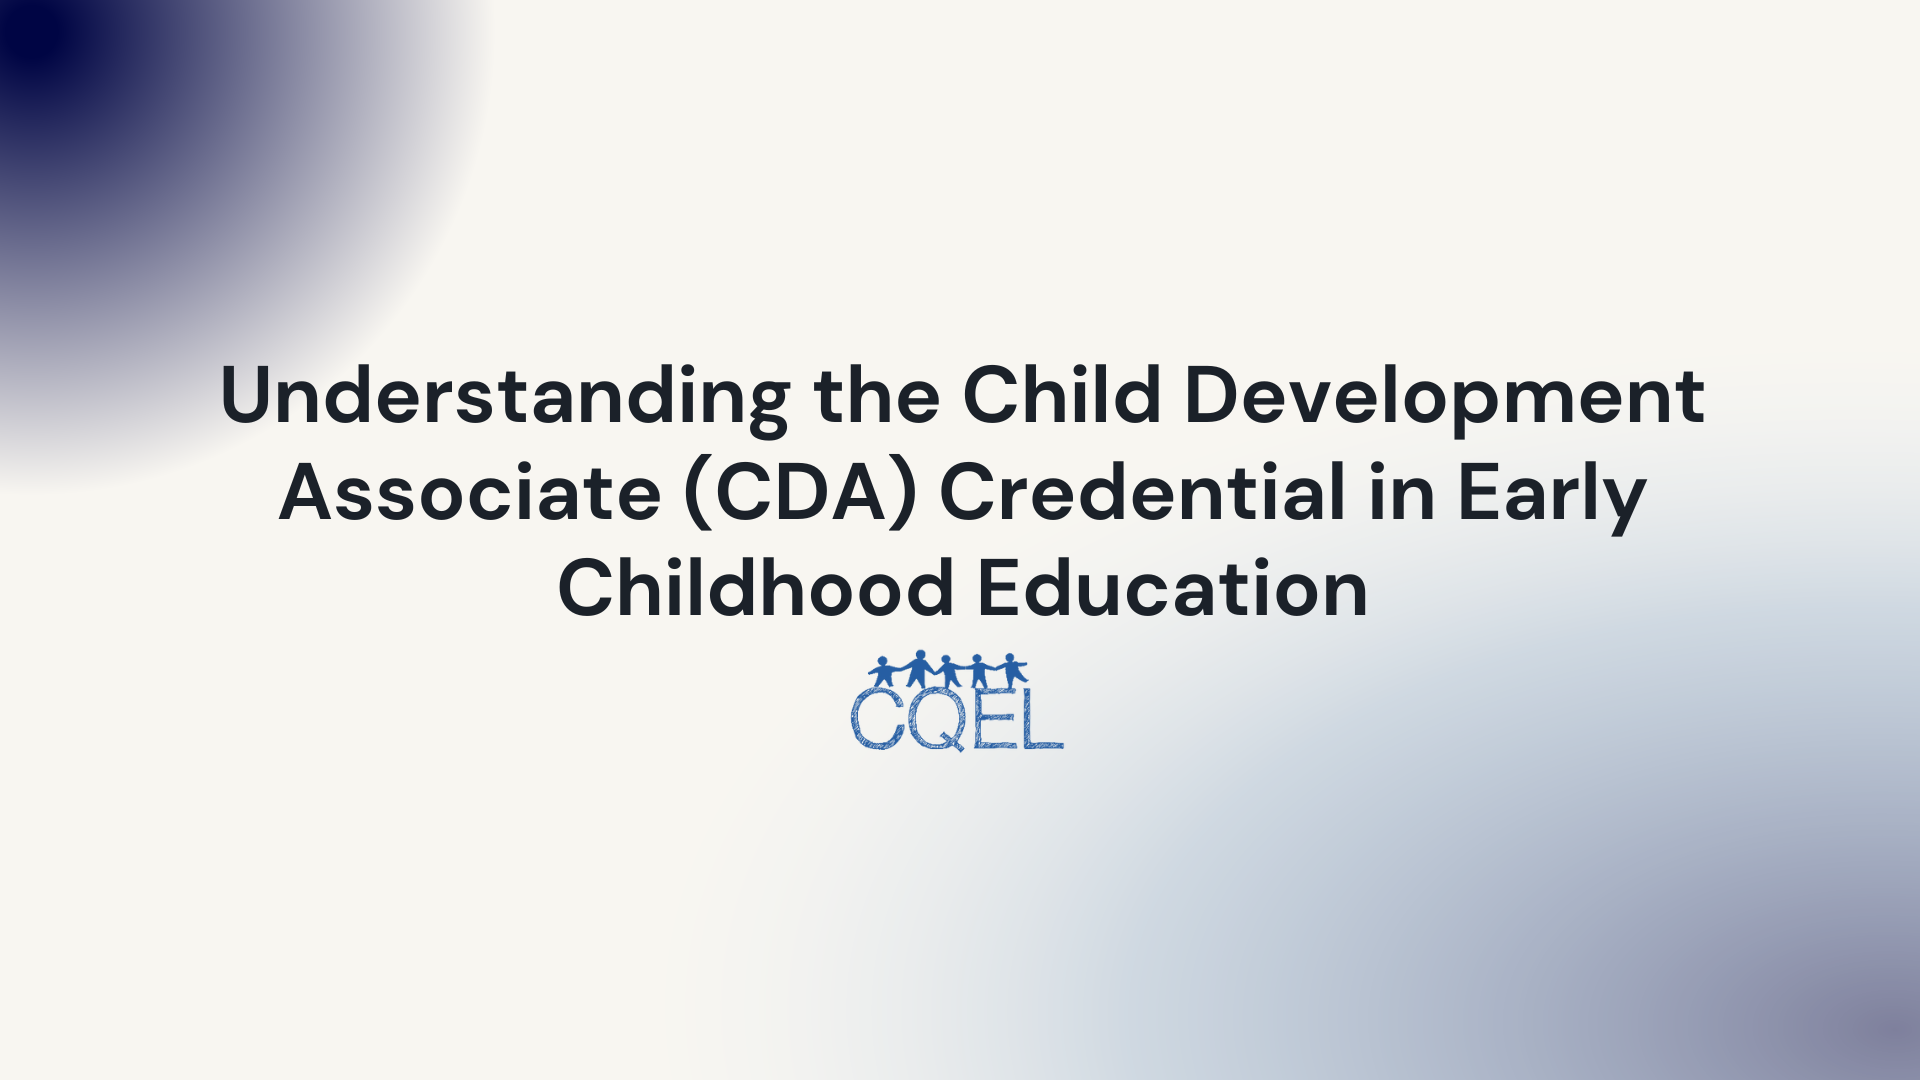 Understanding the Child Development Associate (CDA) Credential in Early Childhood Education